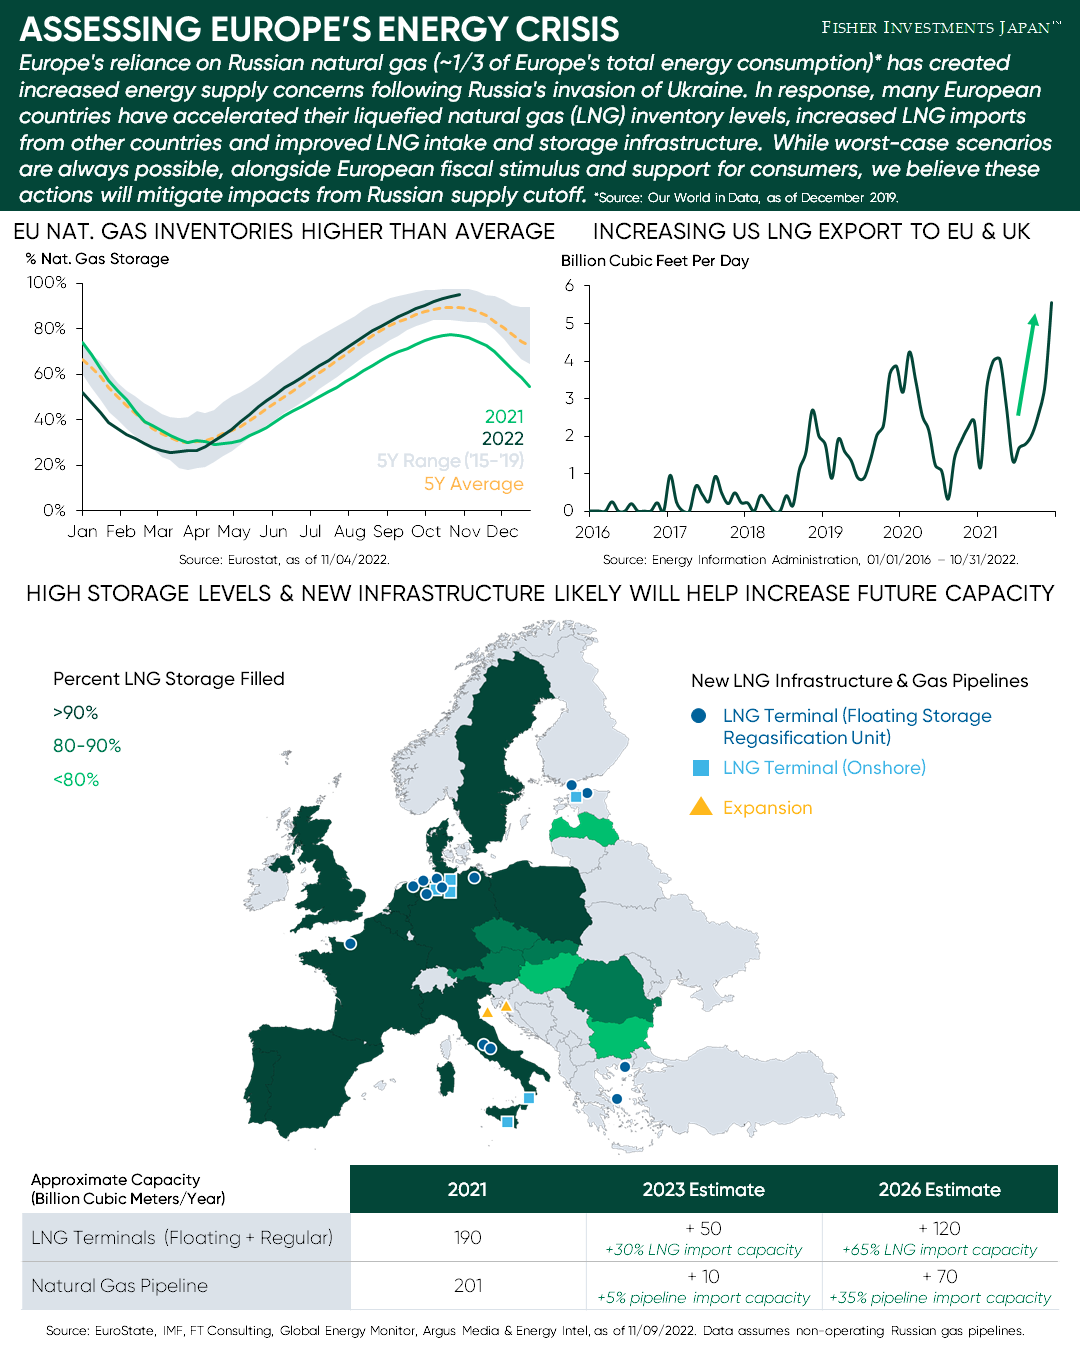 Assessing Europe's Energy Crisis Infographic